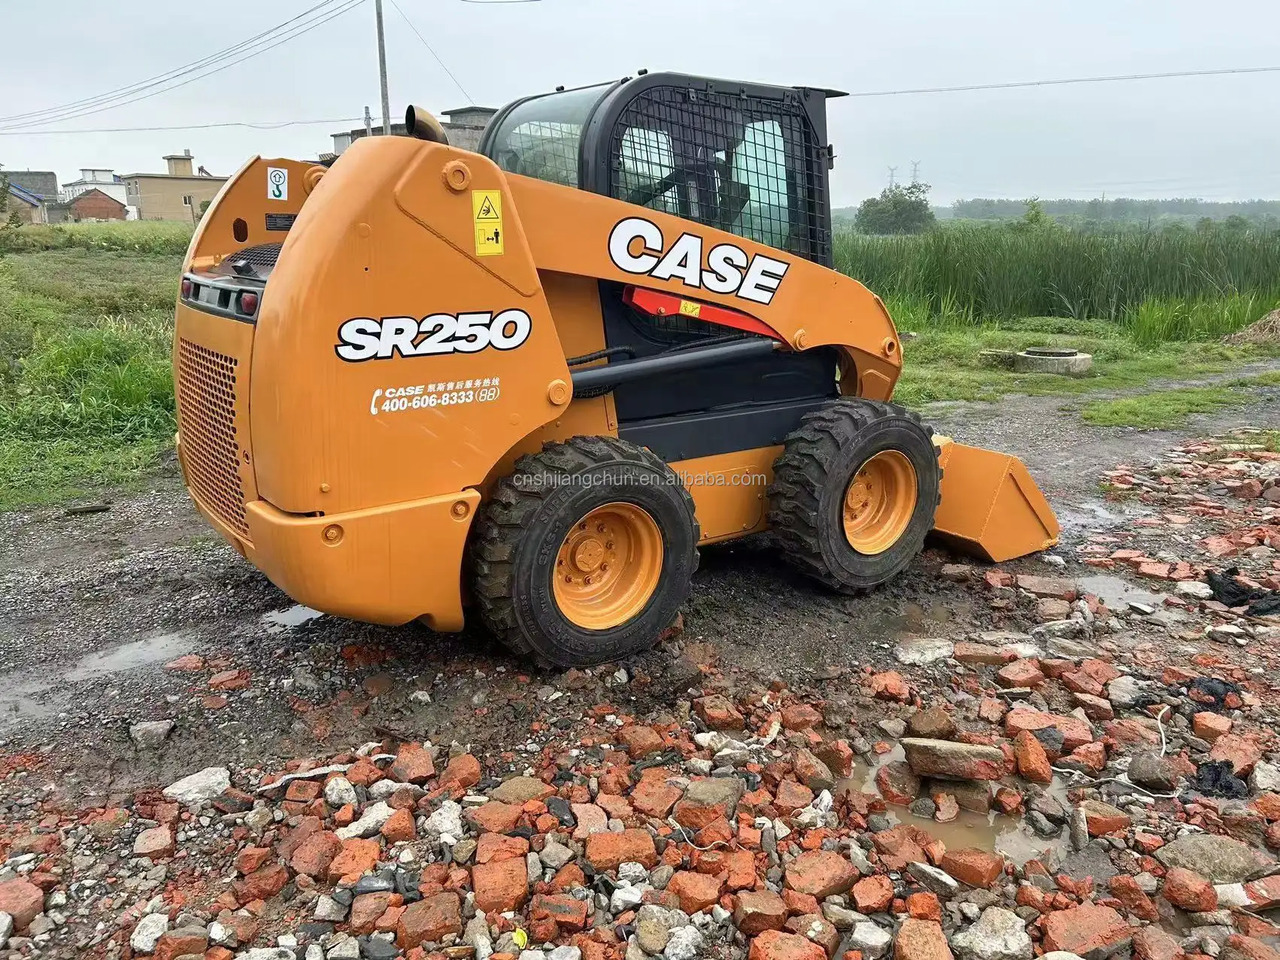 Mini chargeuse Used Skid Steer loader Case 250 in good condition for sale: photos 2